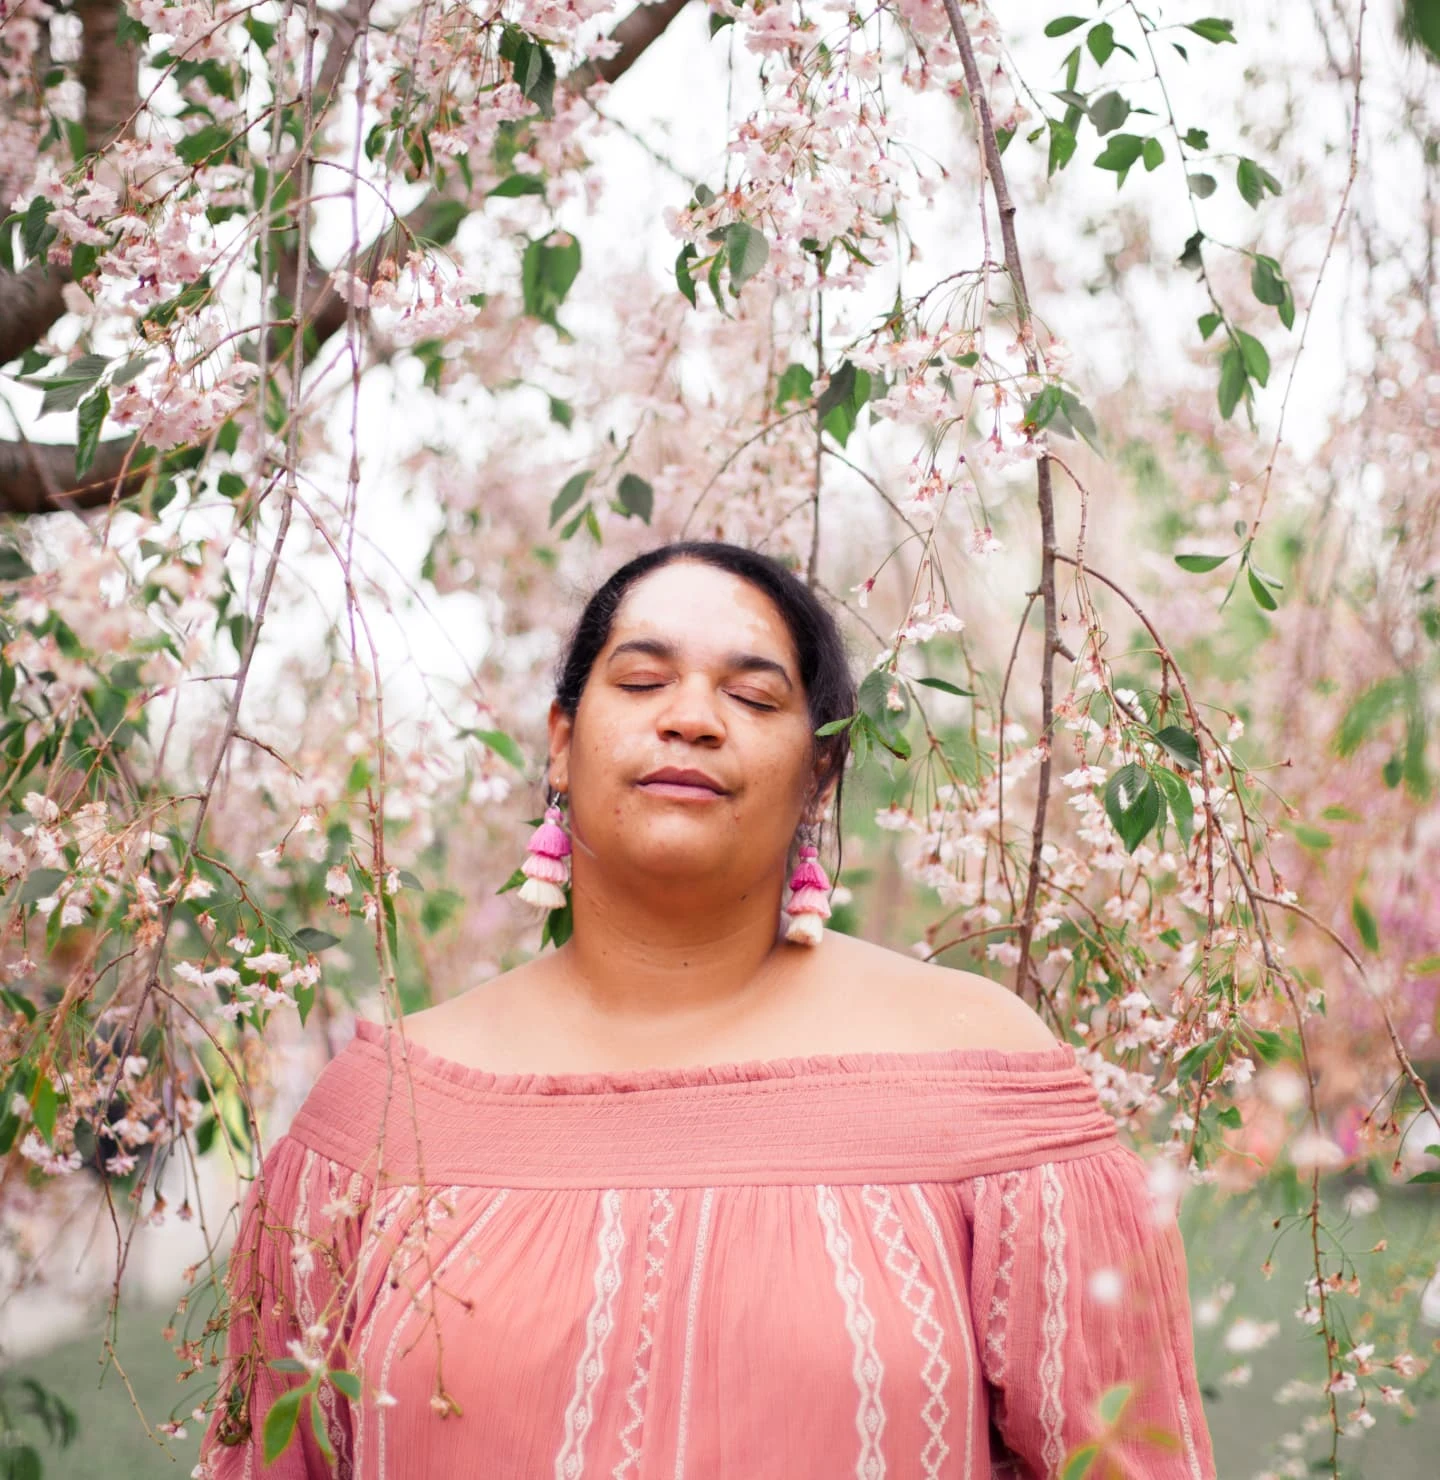 A Black woman in pink stands with her eyes closed under the white and pink blossoms of a tree